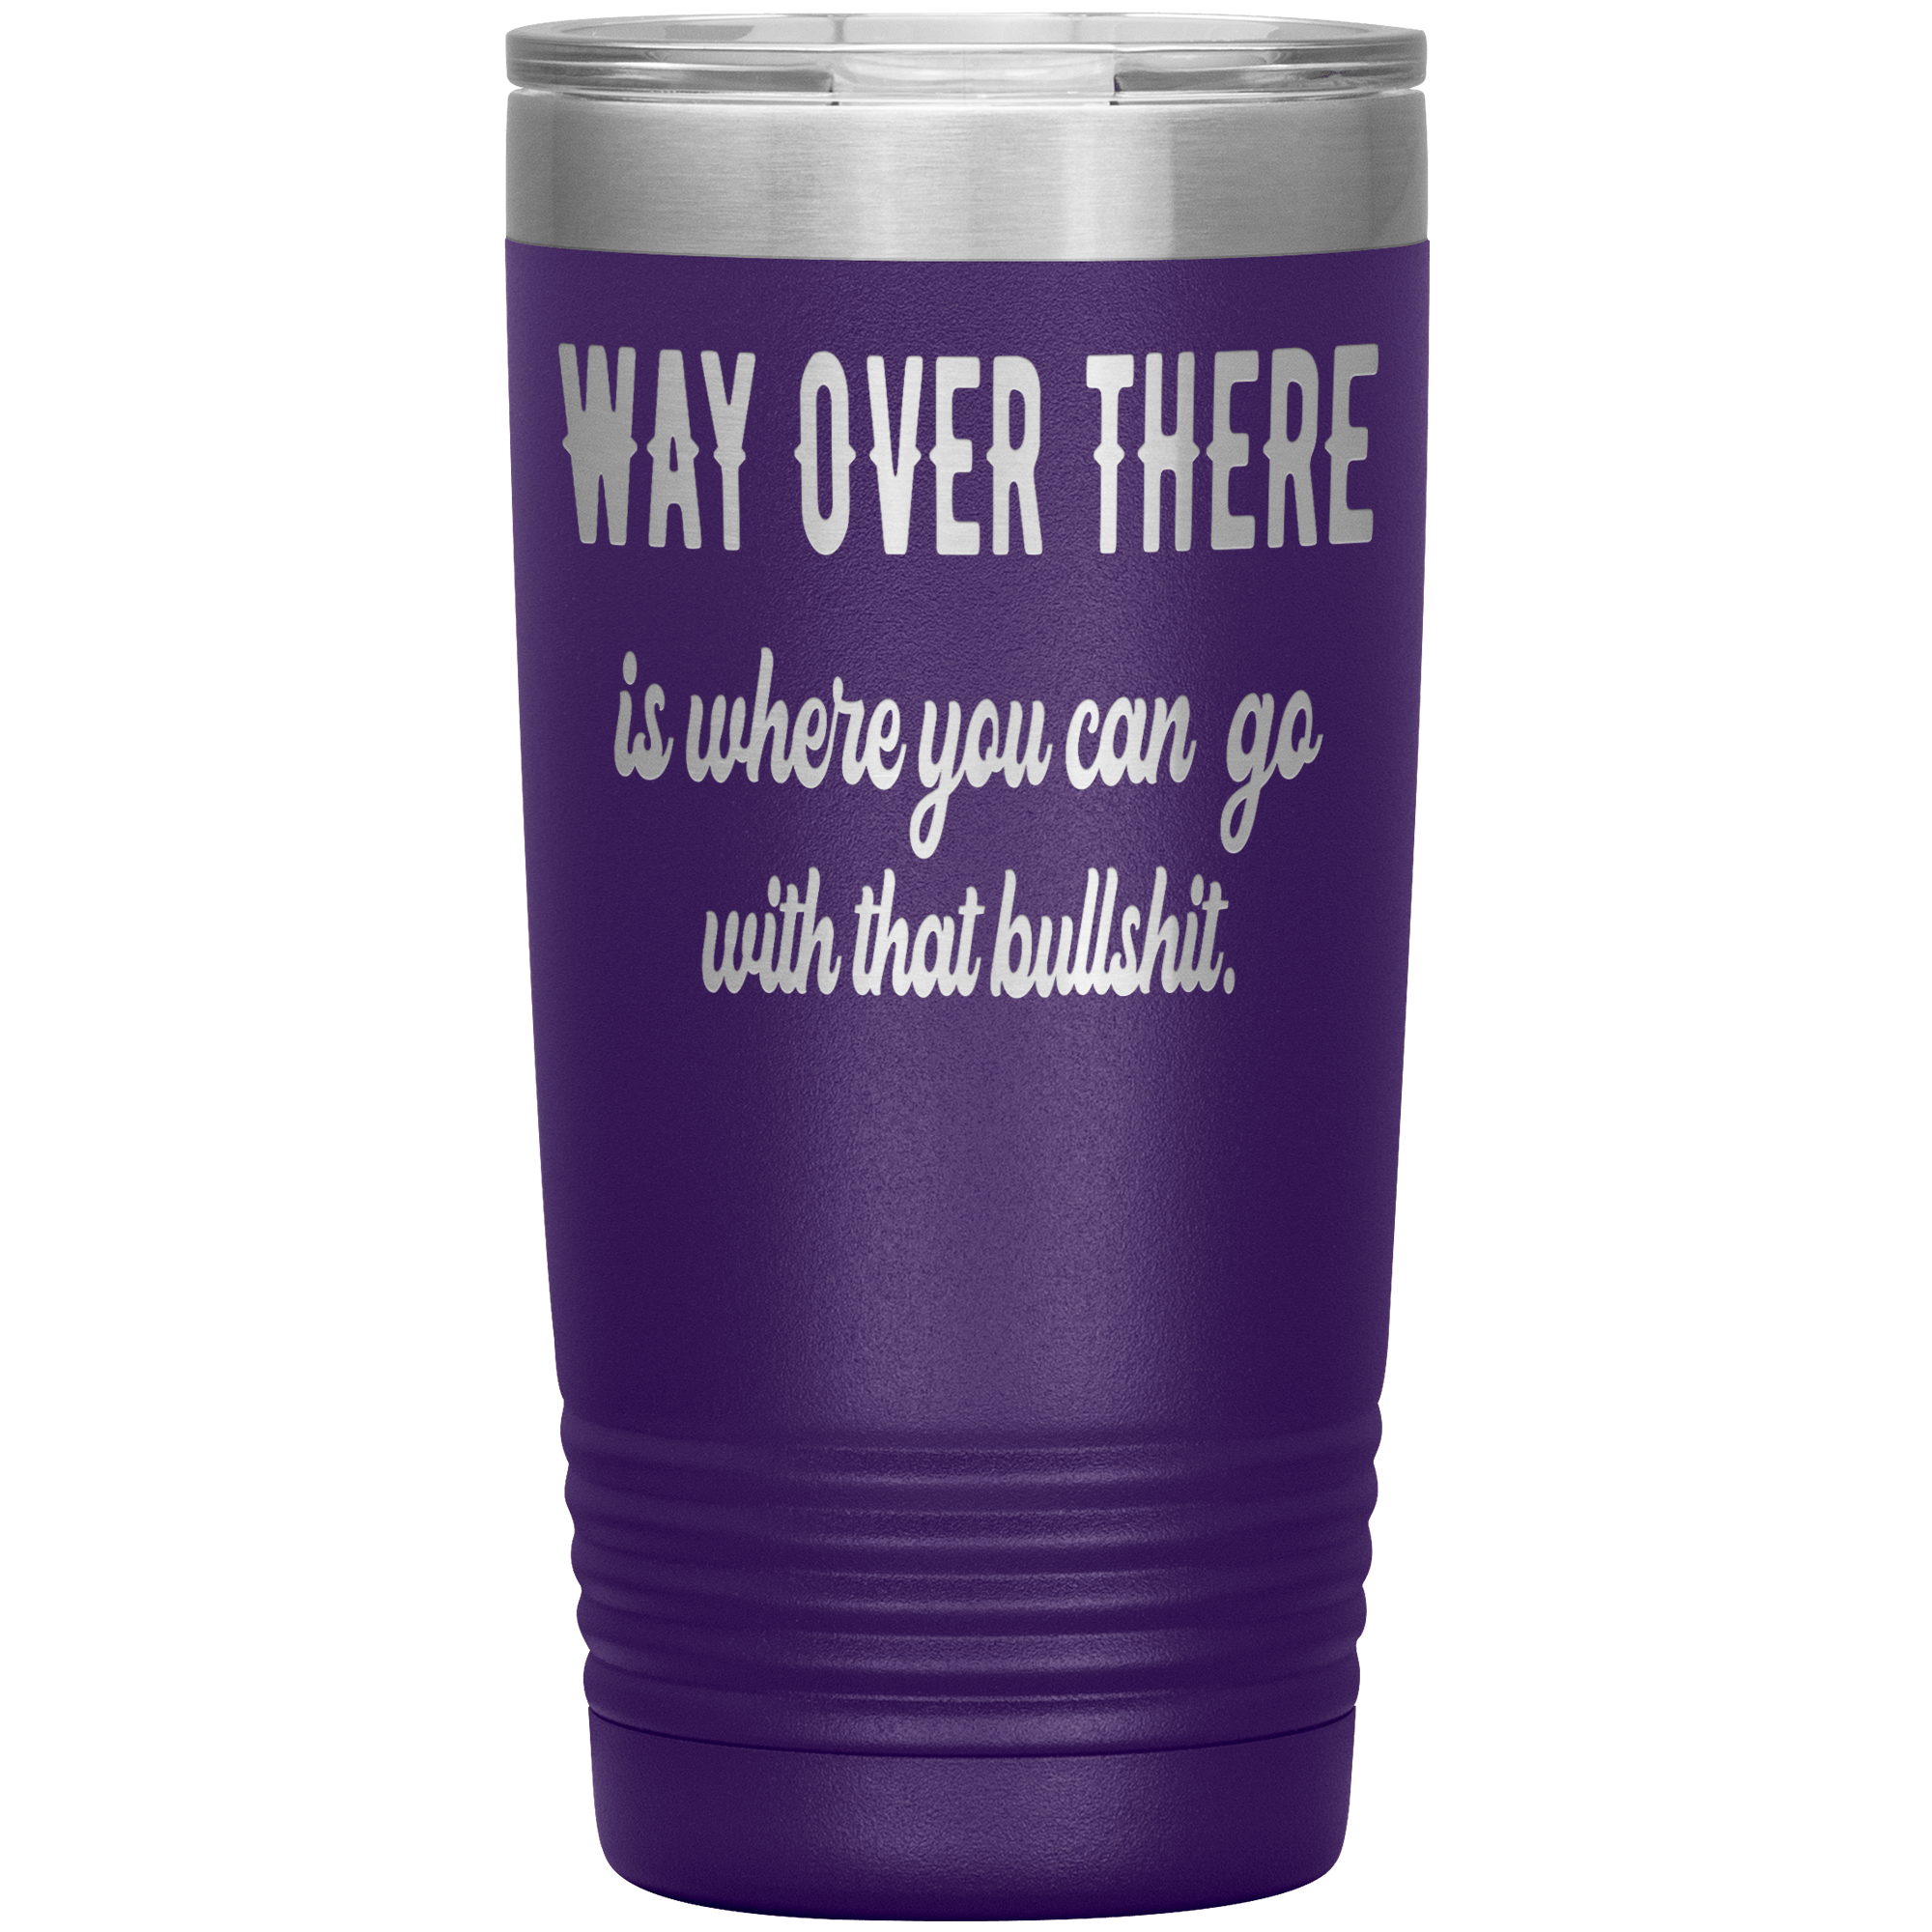 " WAY OVER THERE " TUMBLER